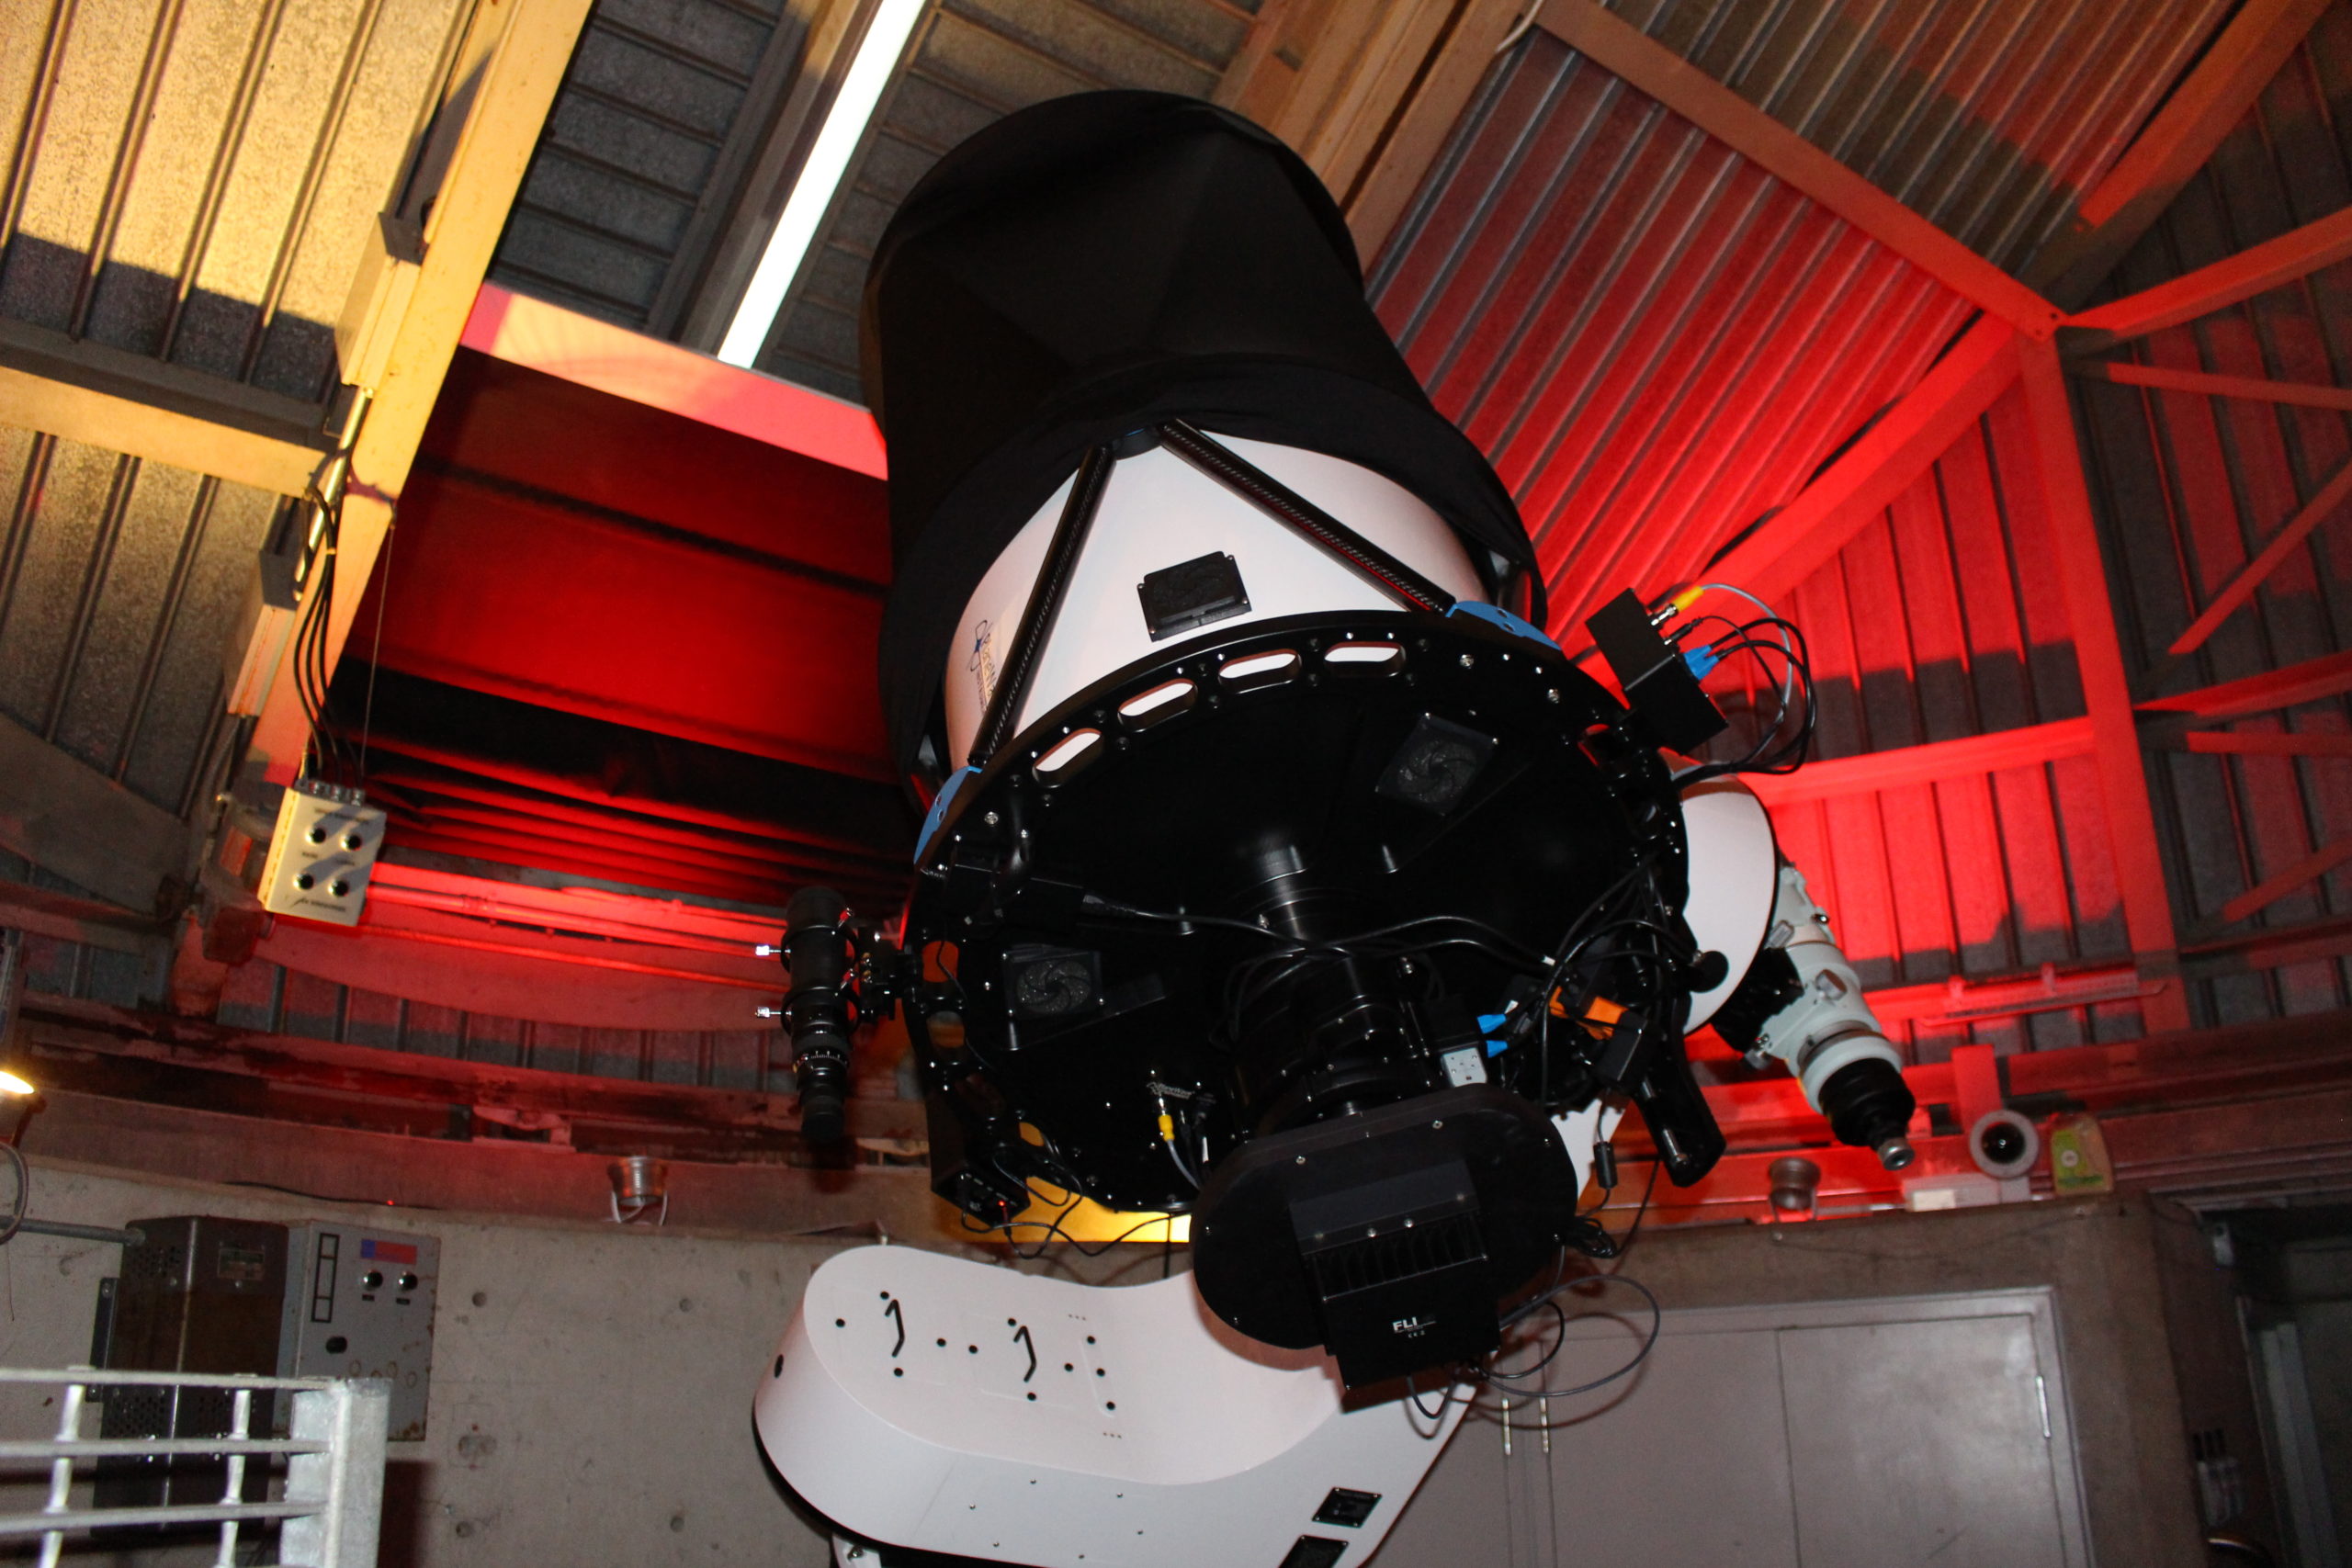 Adler Planetarium 24" reflecting telescope in the Doane Observatory after installation in 2020.